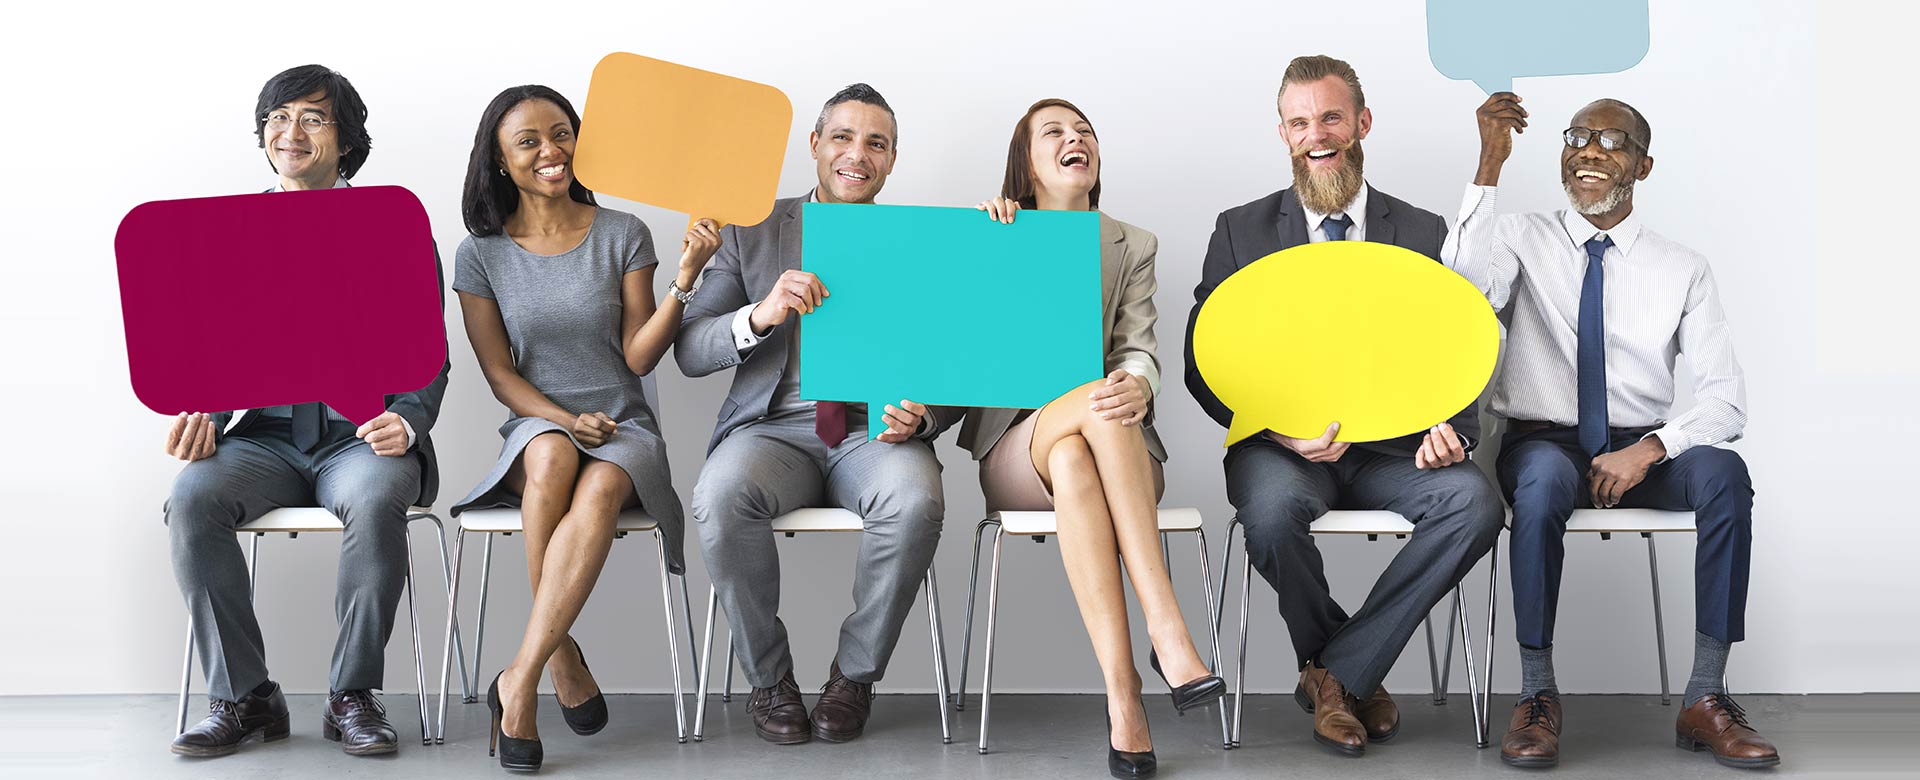 smiling-people-sitting-together-holding-up-blank-comment-bubble-cut-outs